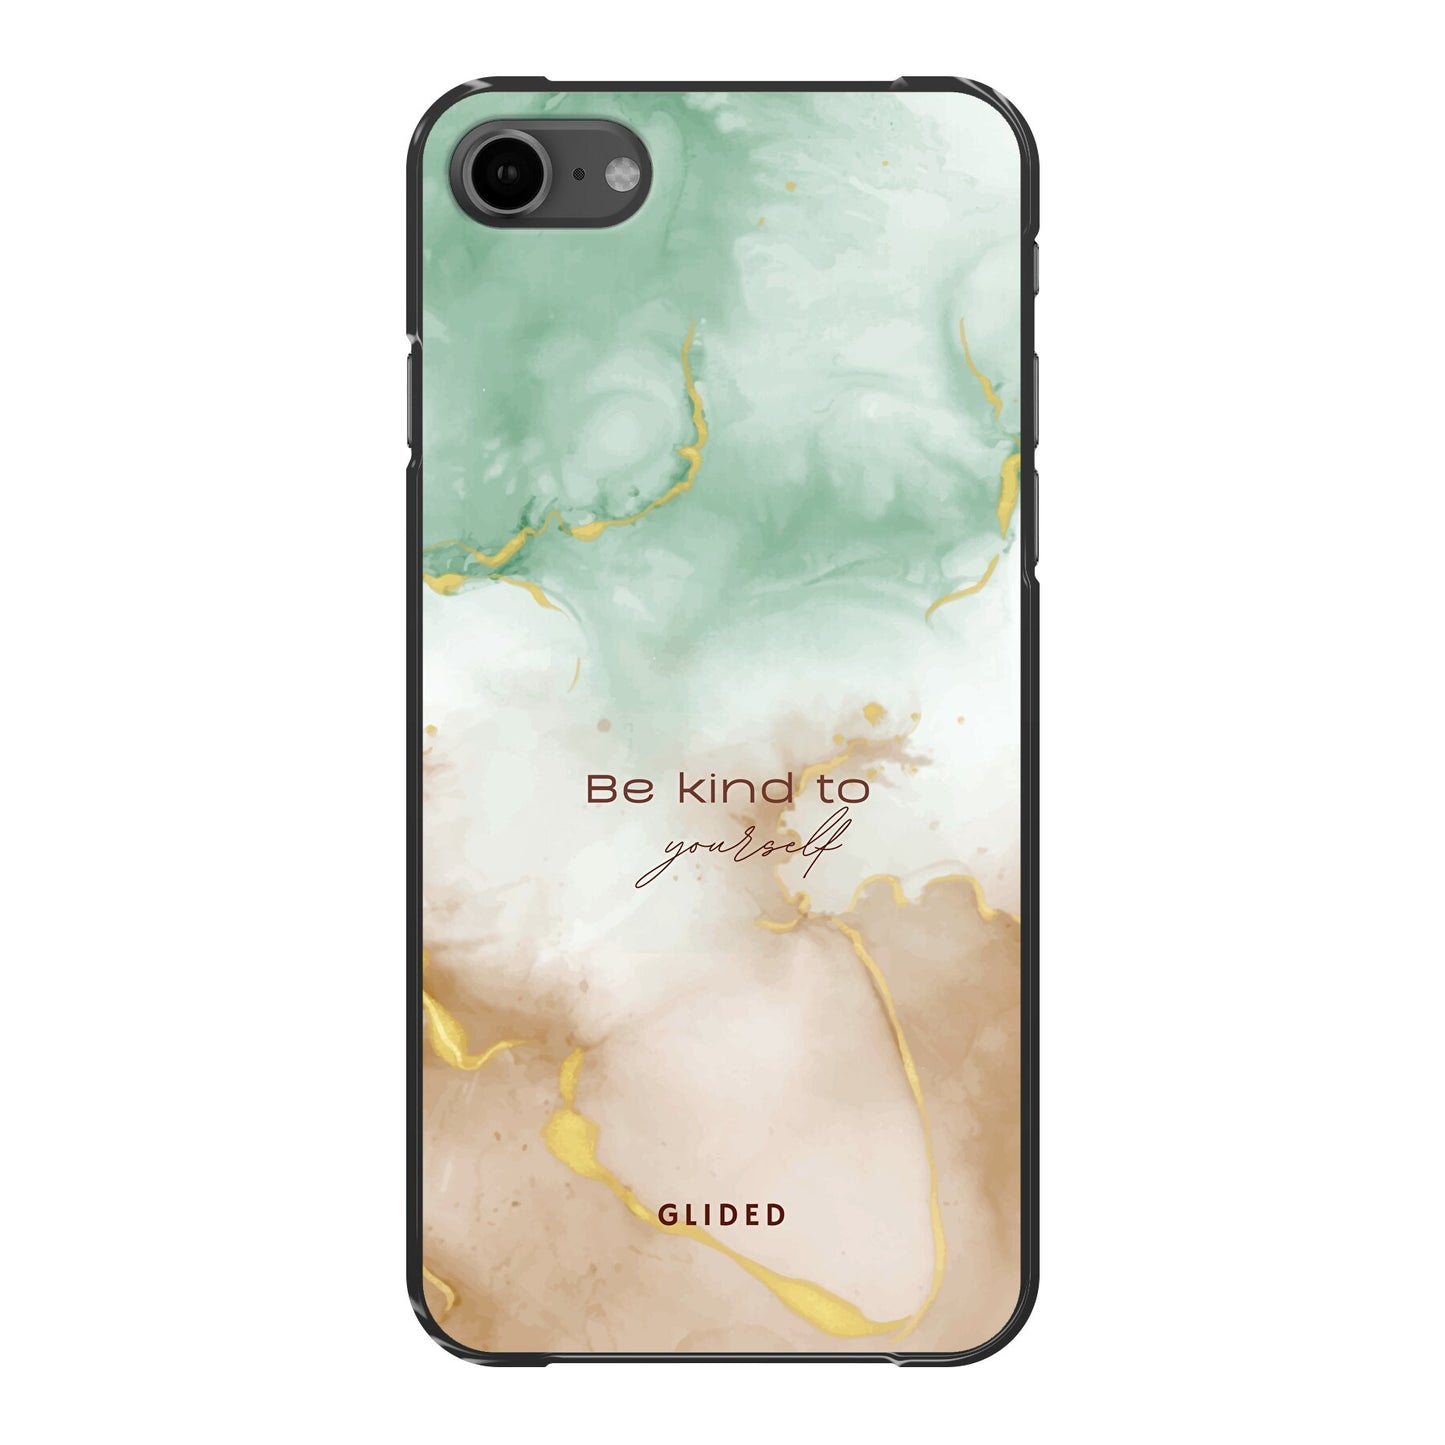 Kind to yourself - iPhone 7 Handyhülle Hard Case